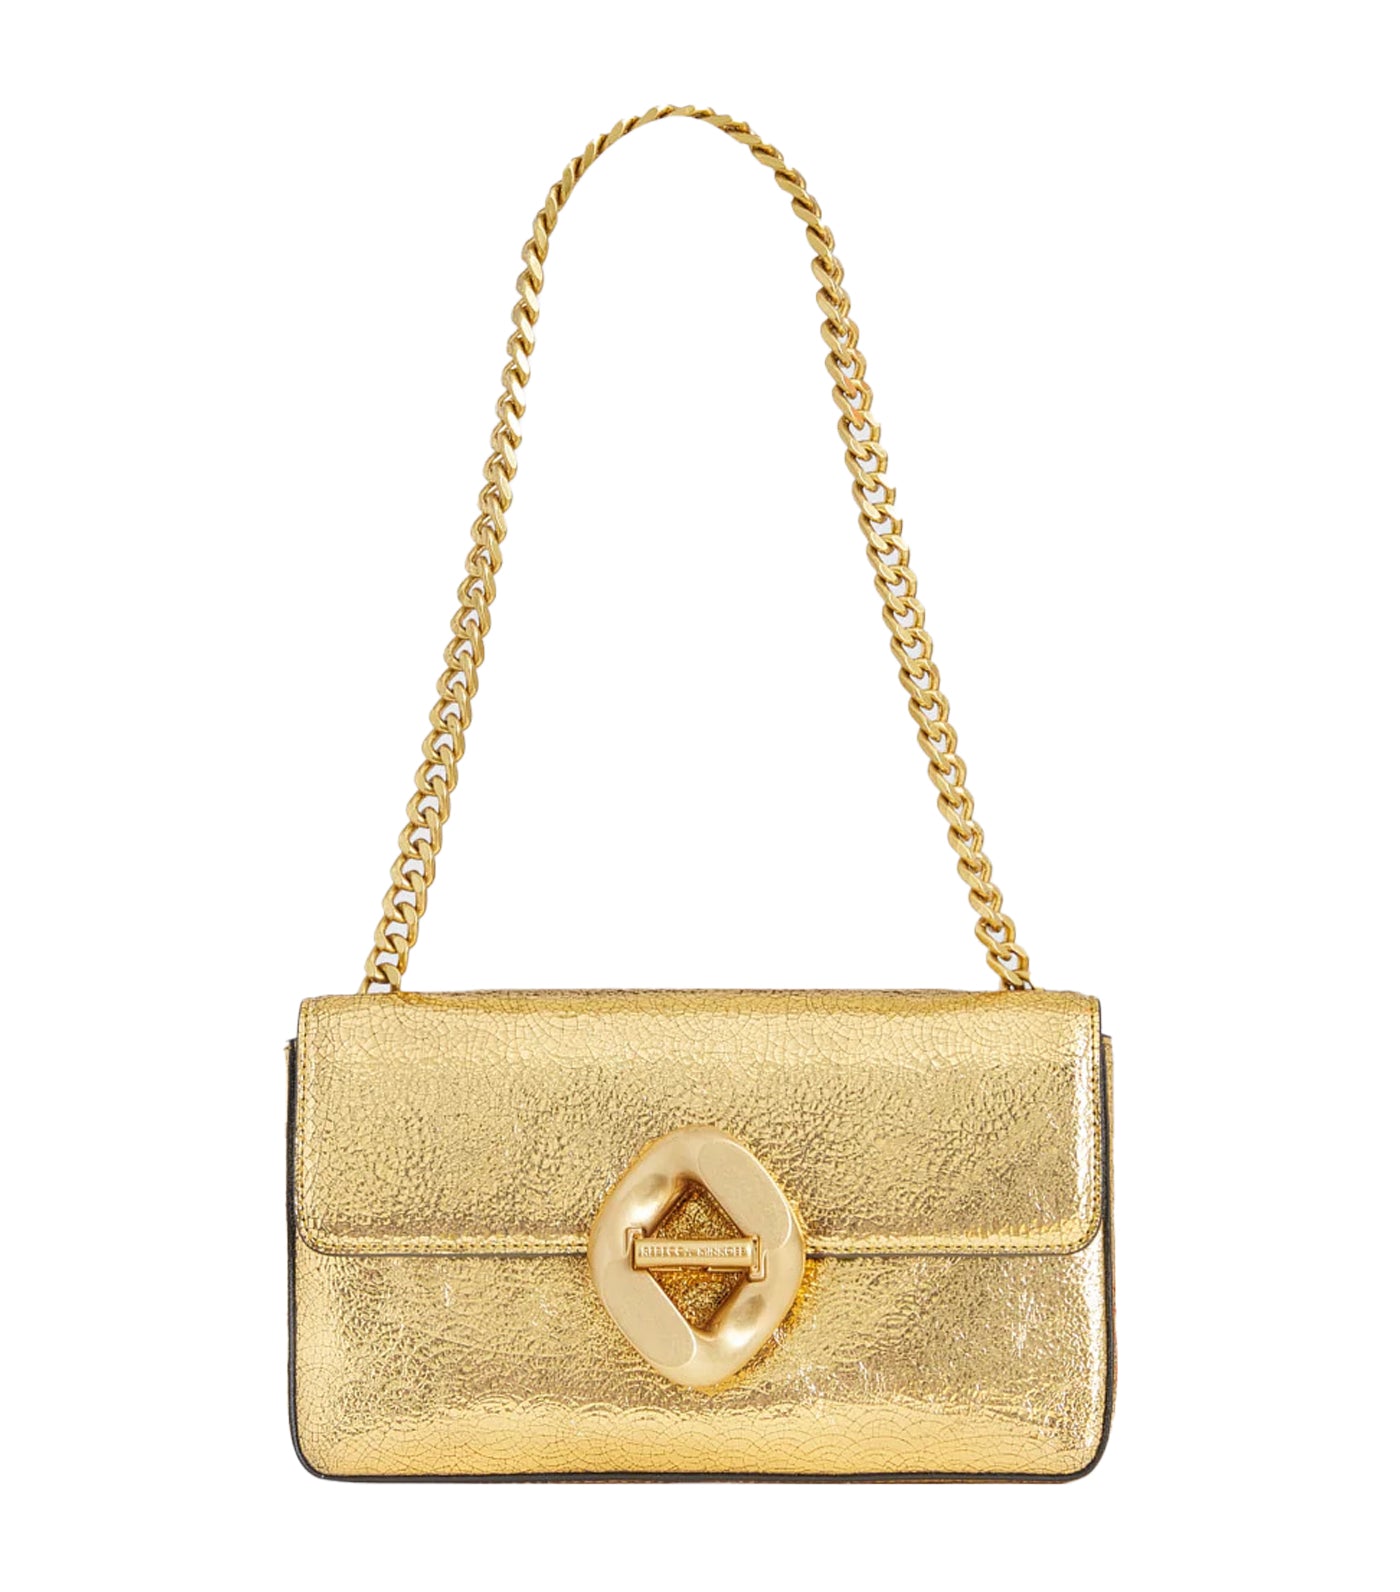 The "G" Small Chain Shoulder Bag Gold